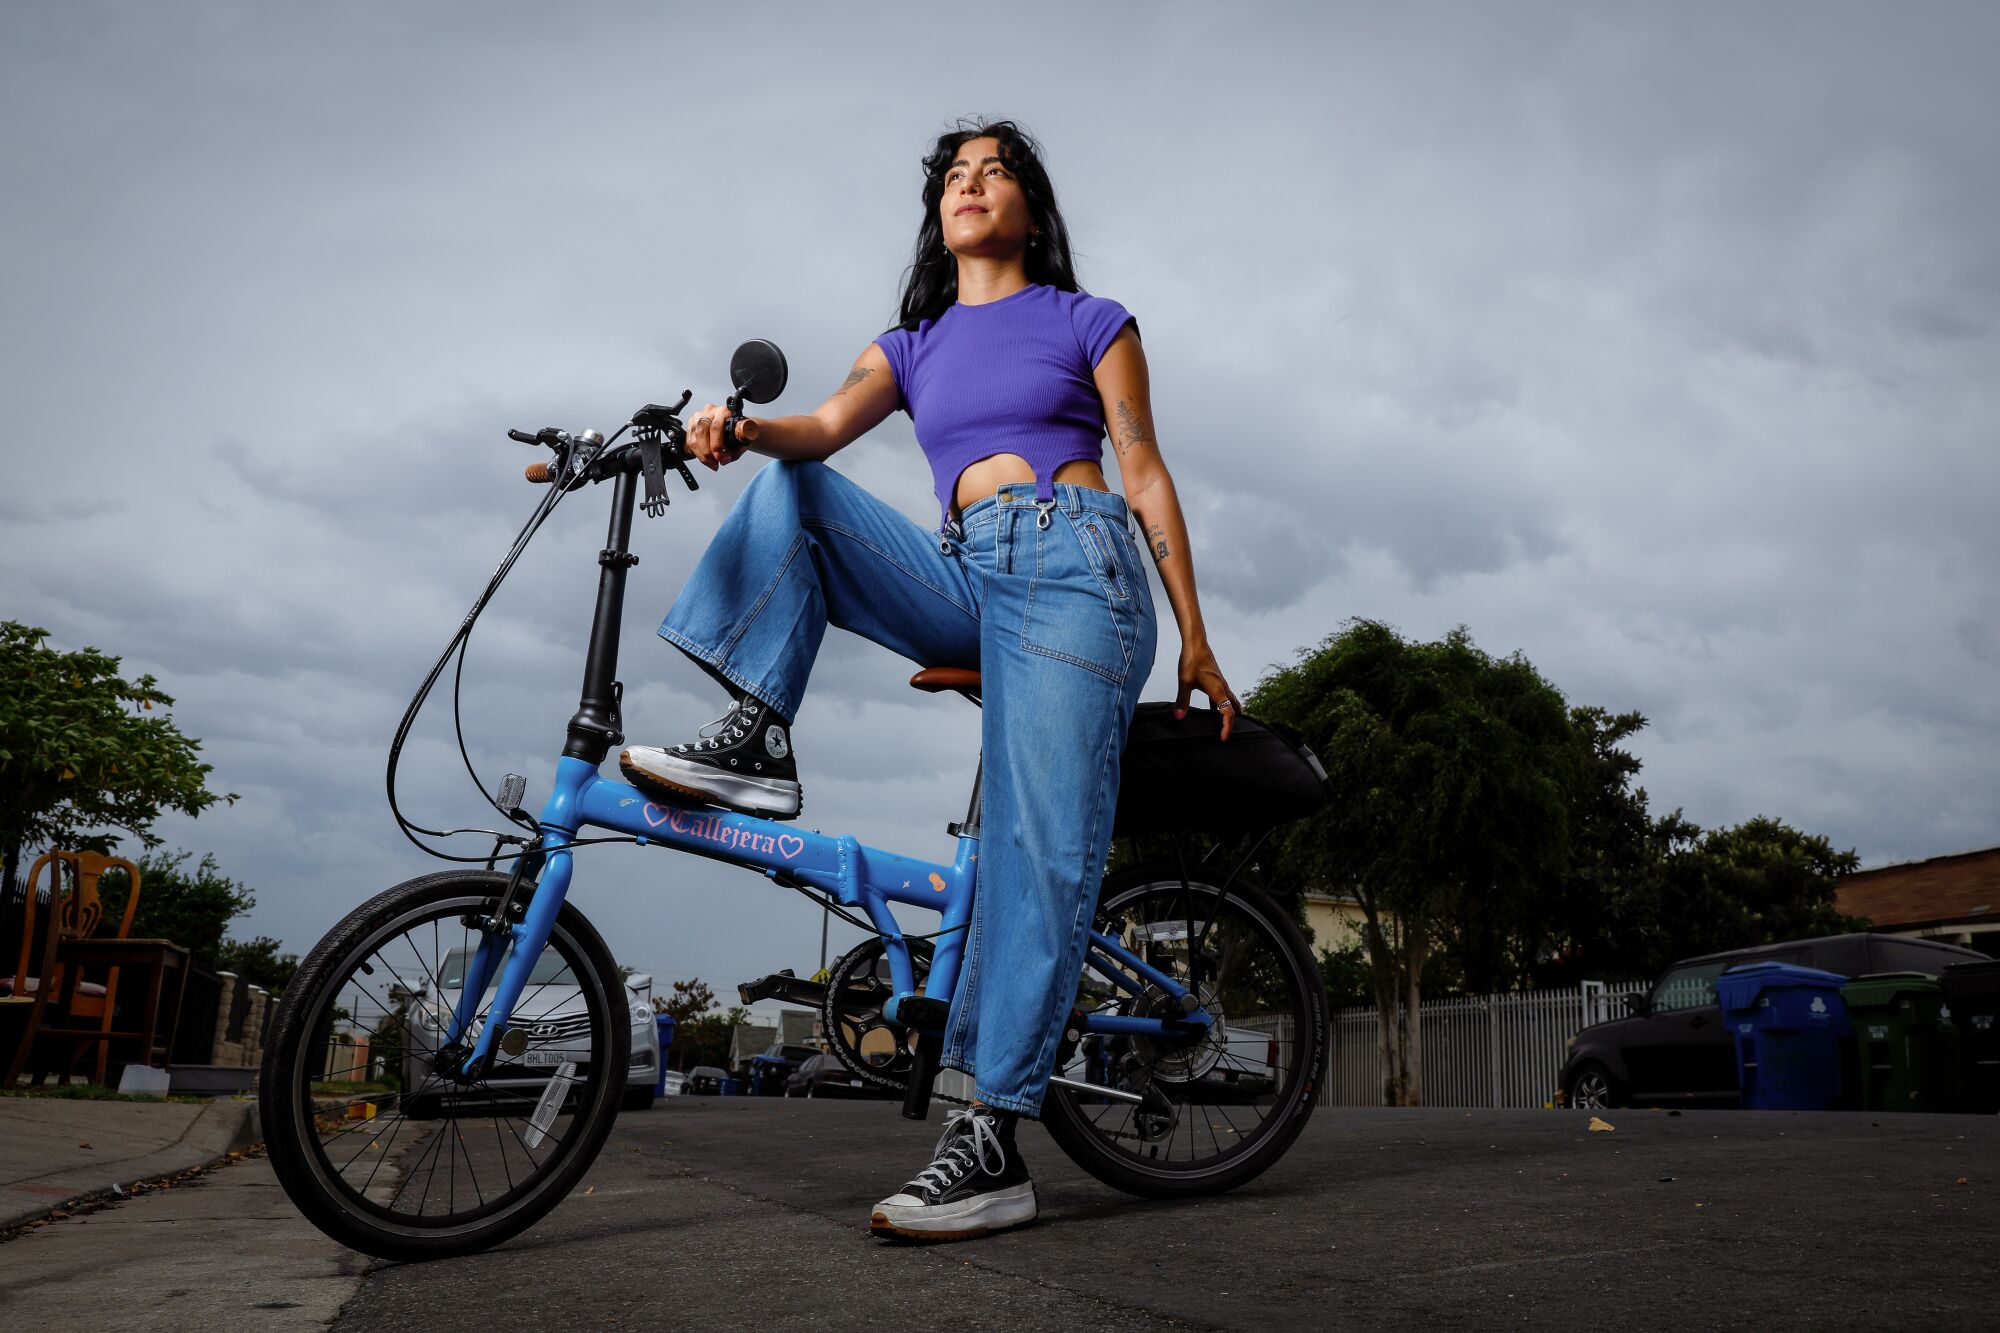 A portrait of Michelle Moro on a neighborhood street with her blue bike.